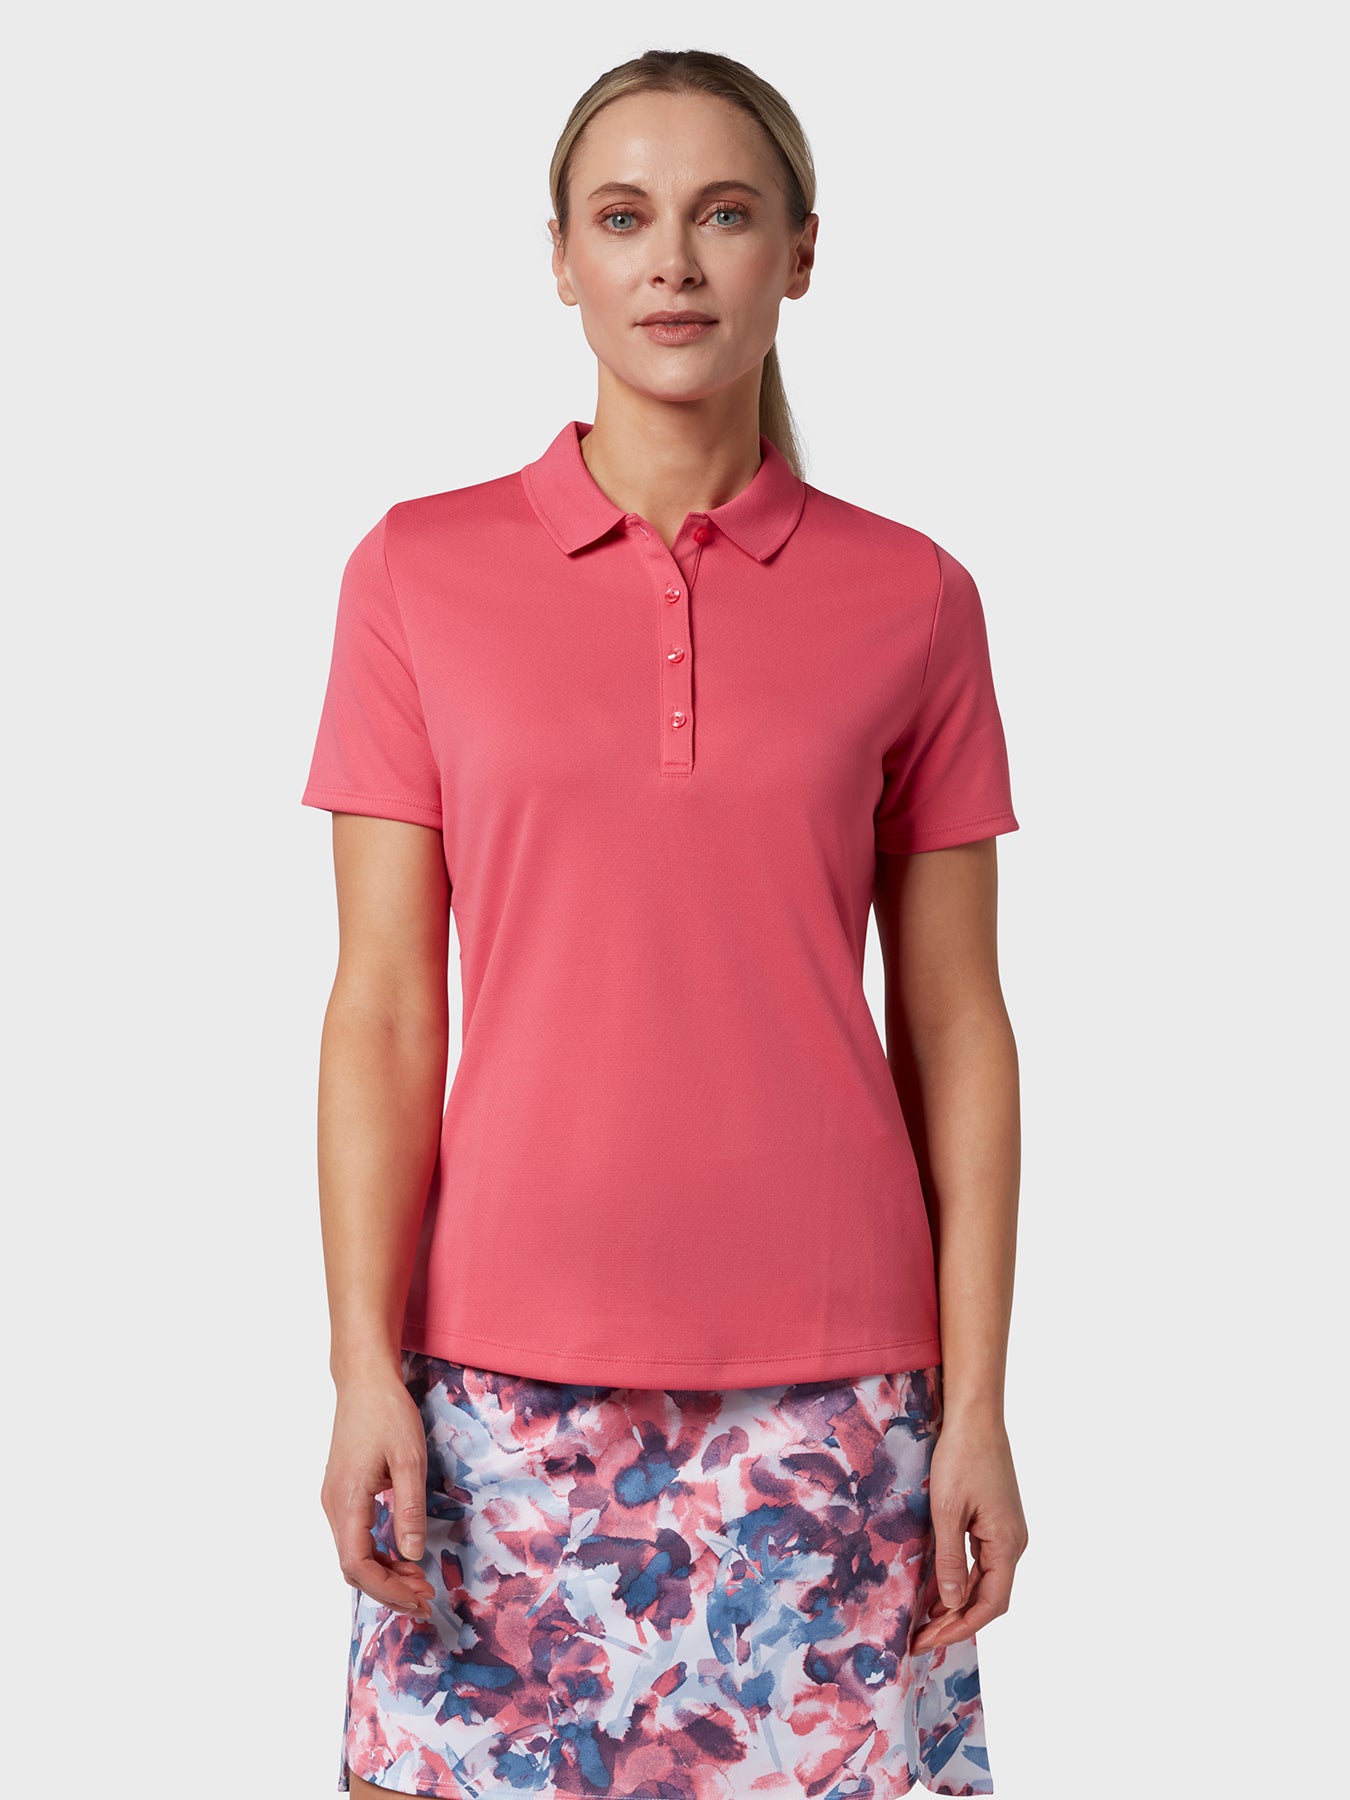 View Swing Tech Womens Polo In Fruit Dove information